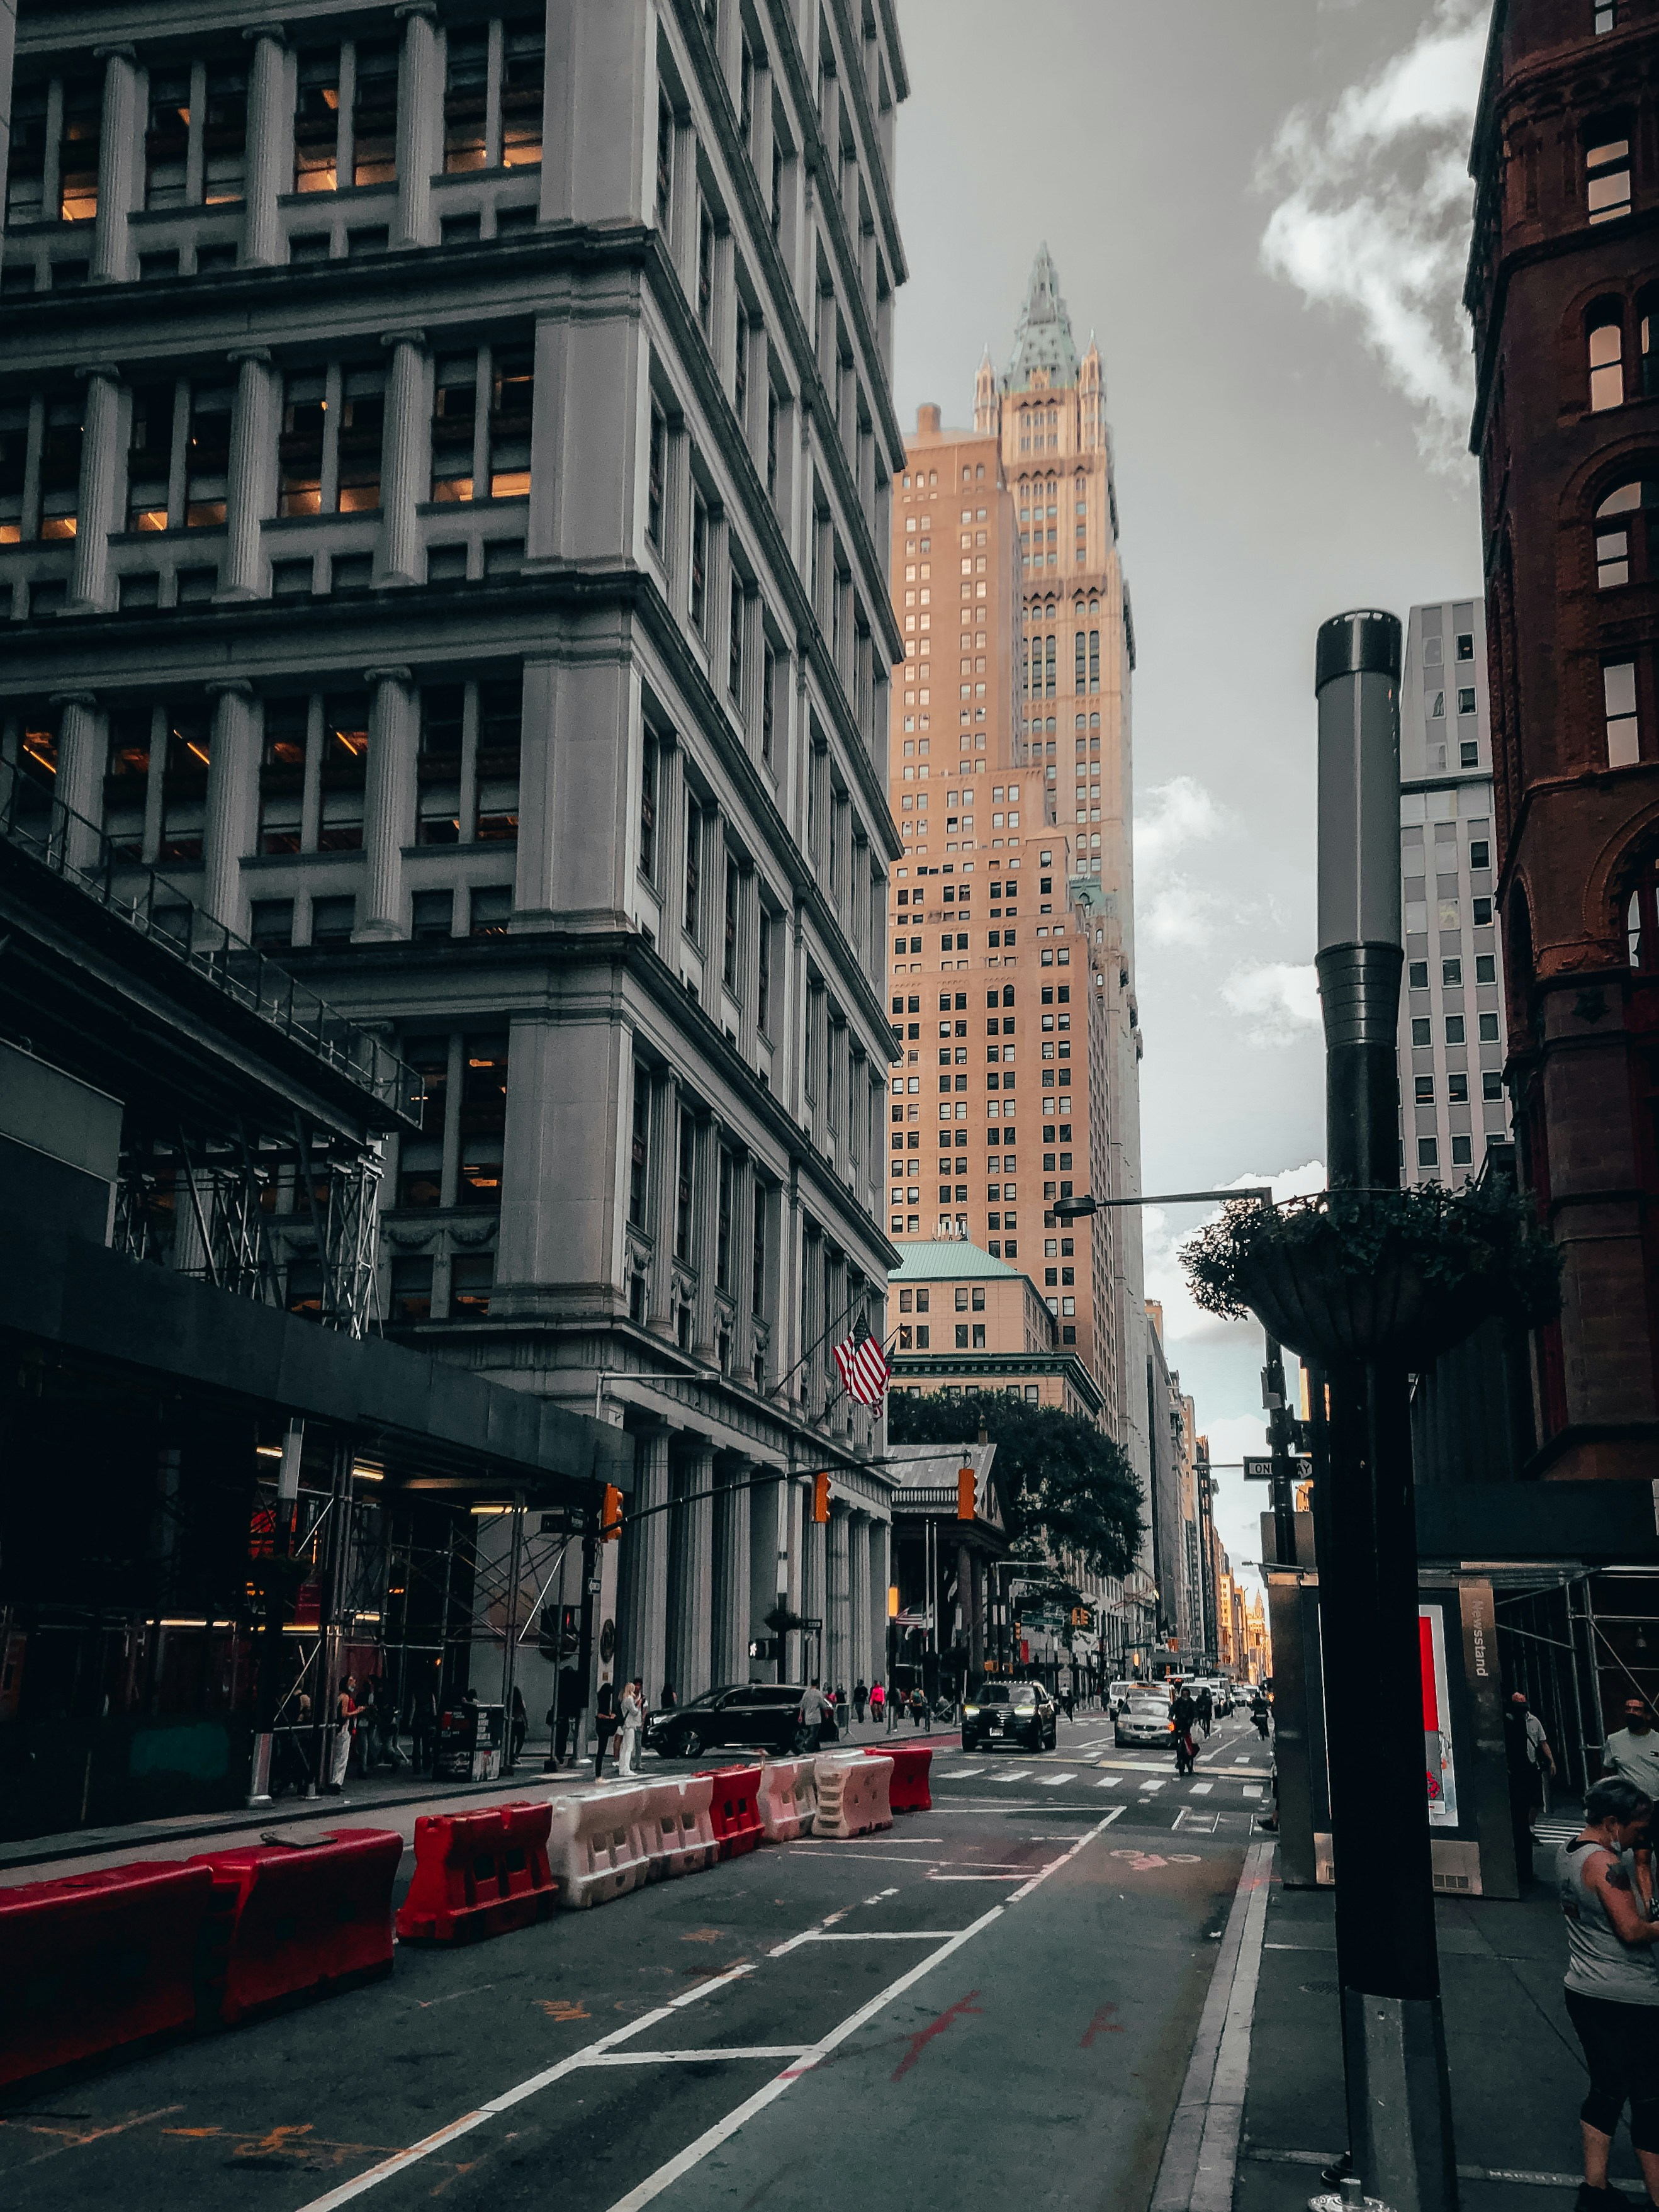 New York City streets captured on an iPhone X.